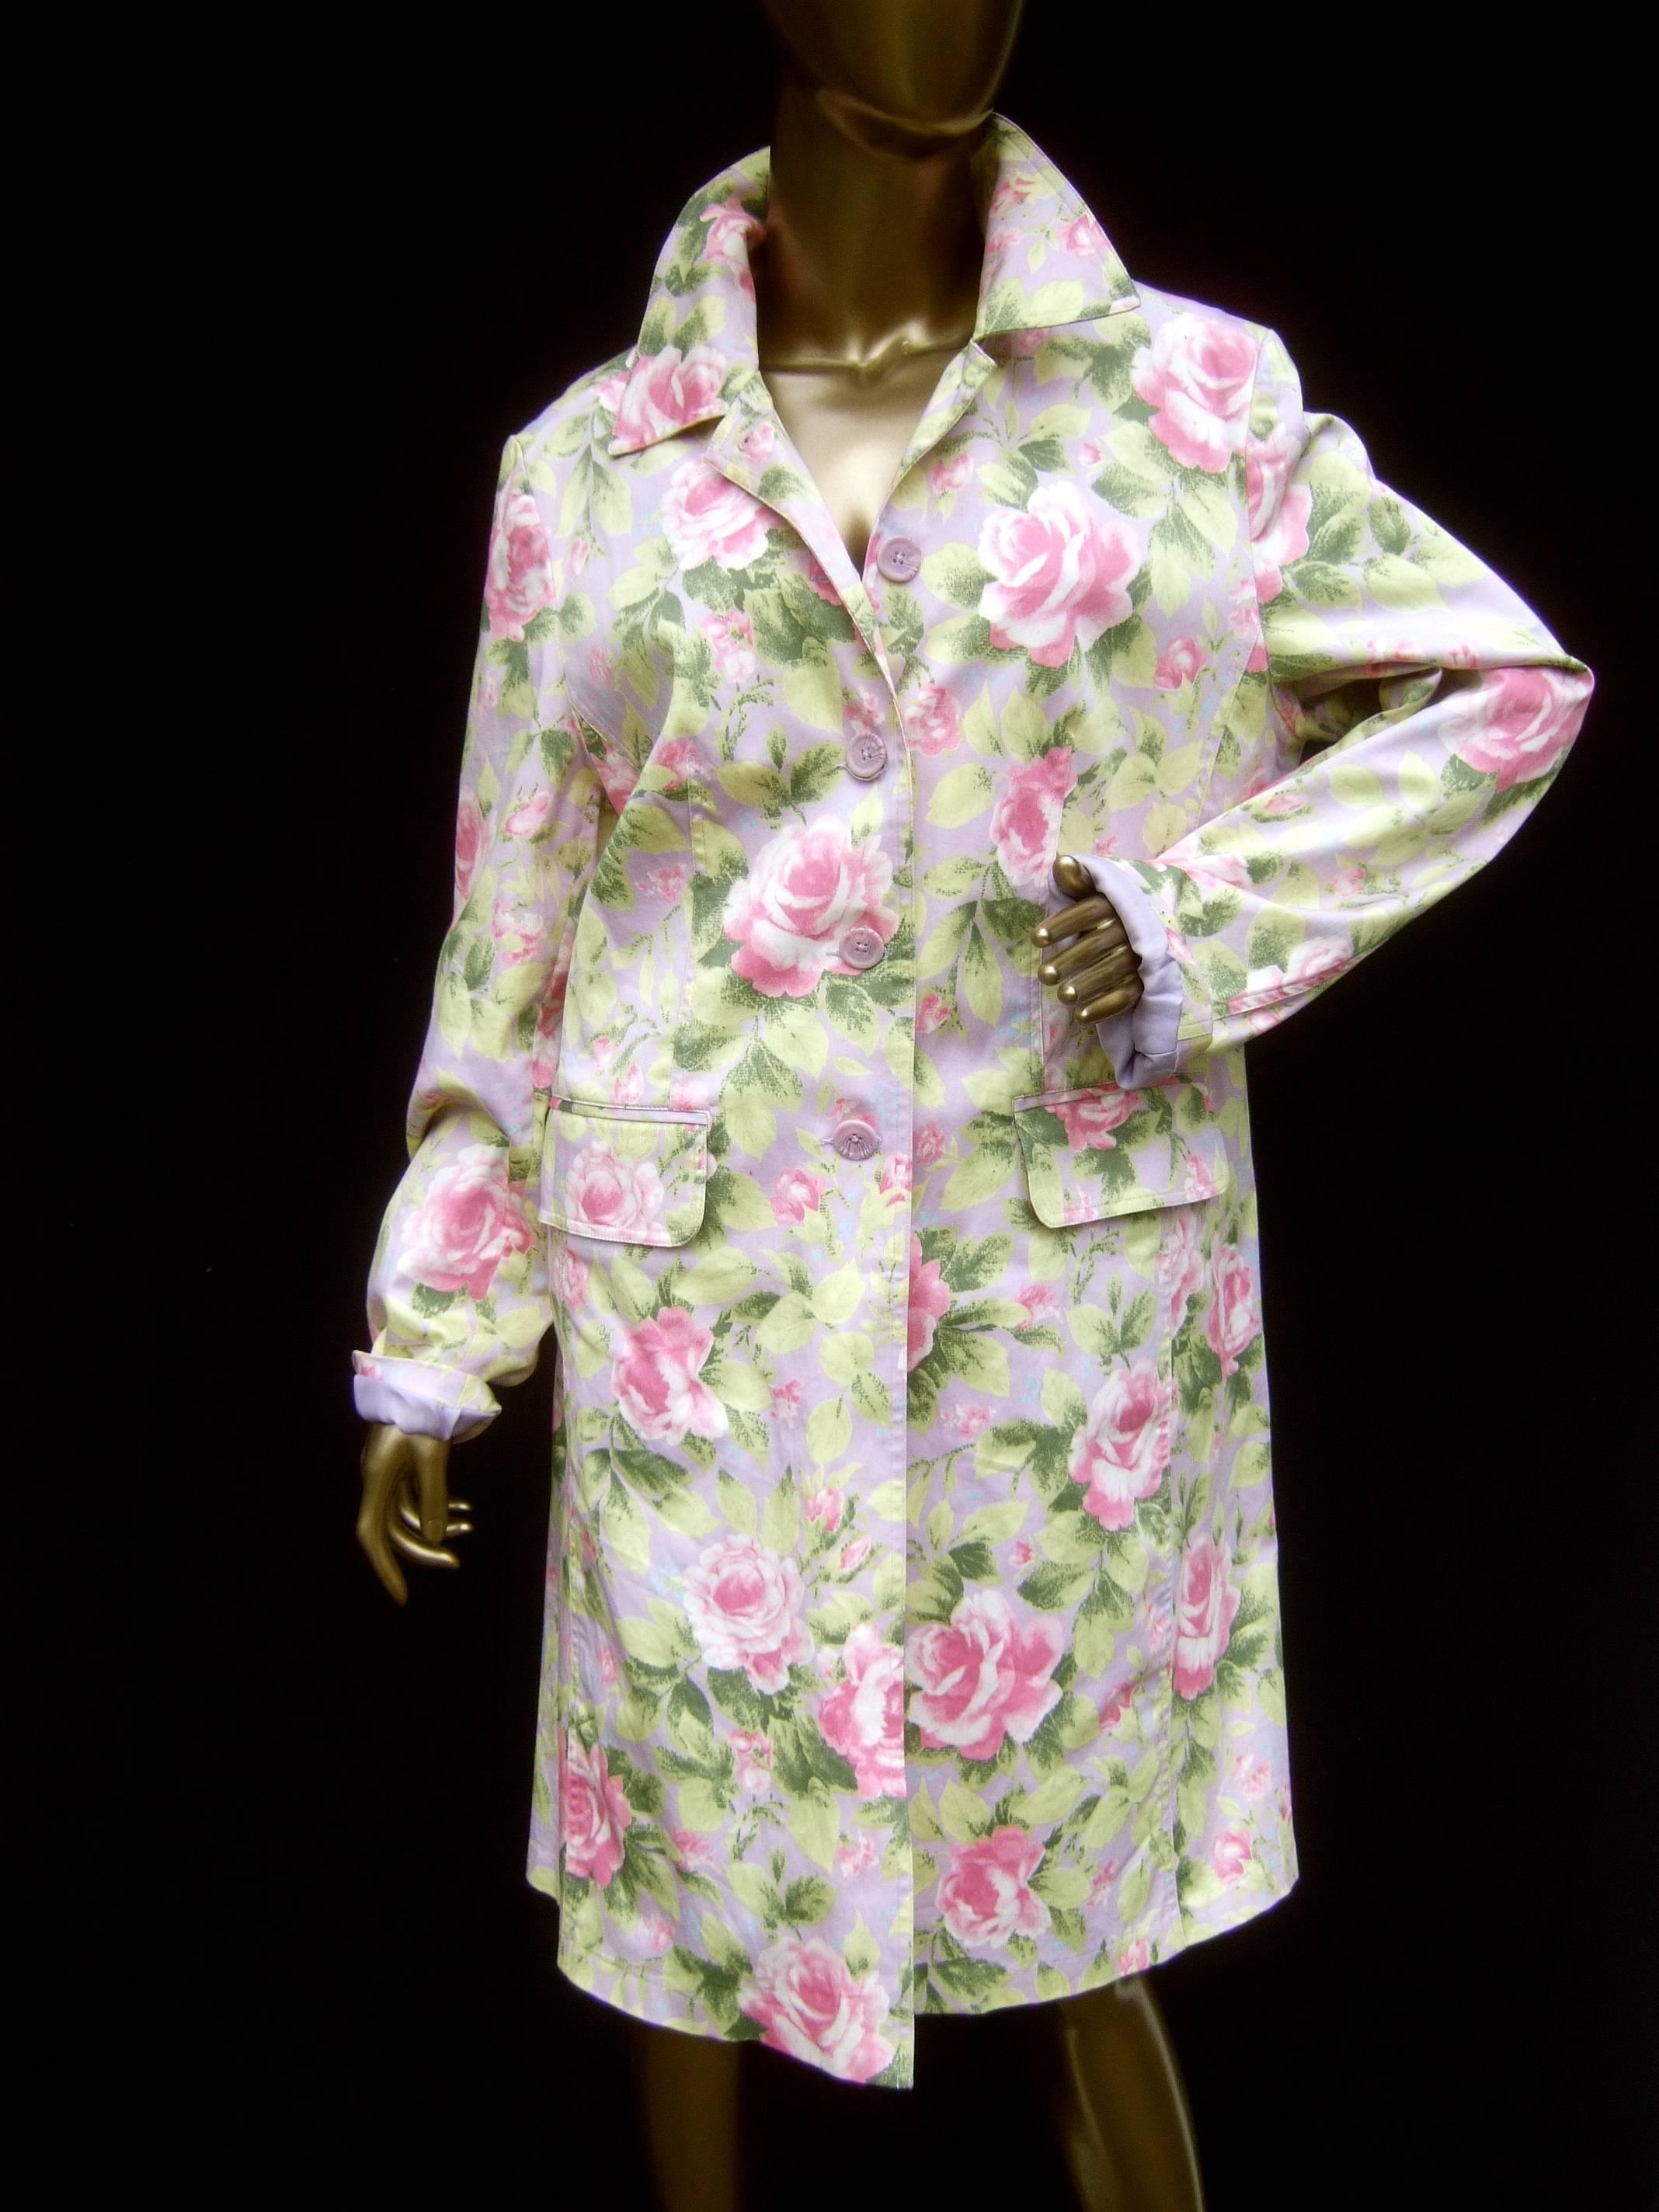 Cotton pastel rose garden floral print coat c 1990s
The spring time cotton coat is illustrated with 
billowy pale pink roses set against a muted 
lavender background 

The light weight floral coat has a set of lavender
lucite buttons that partially